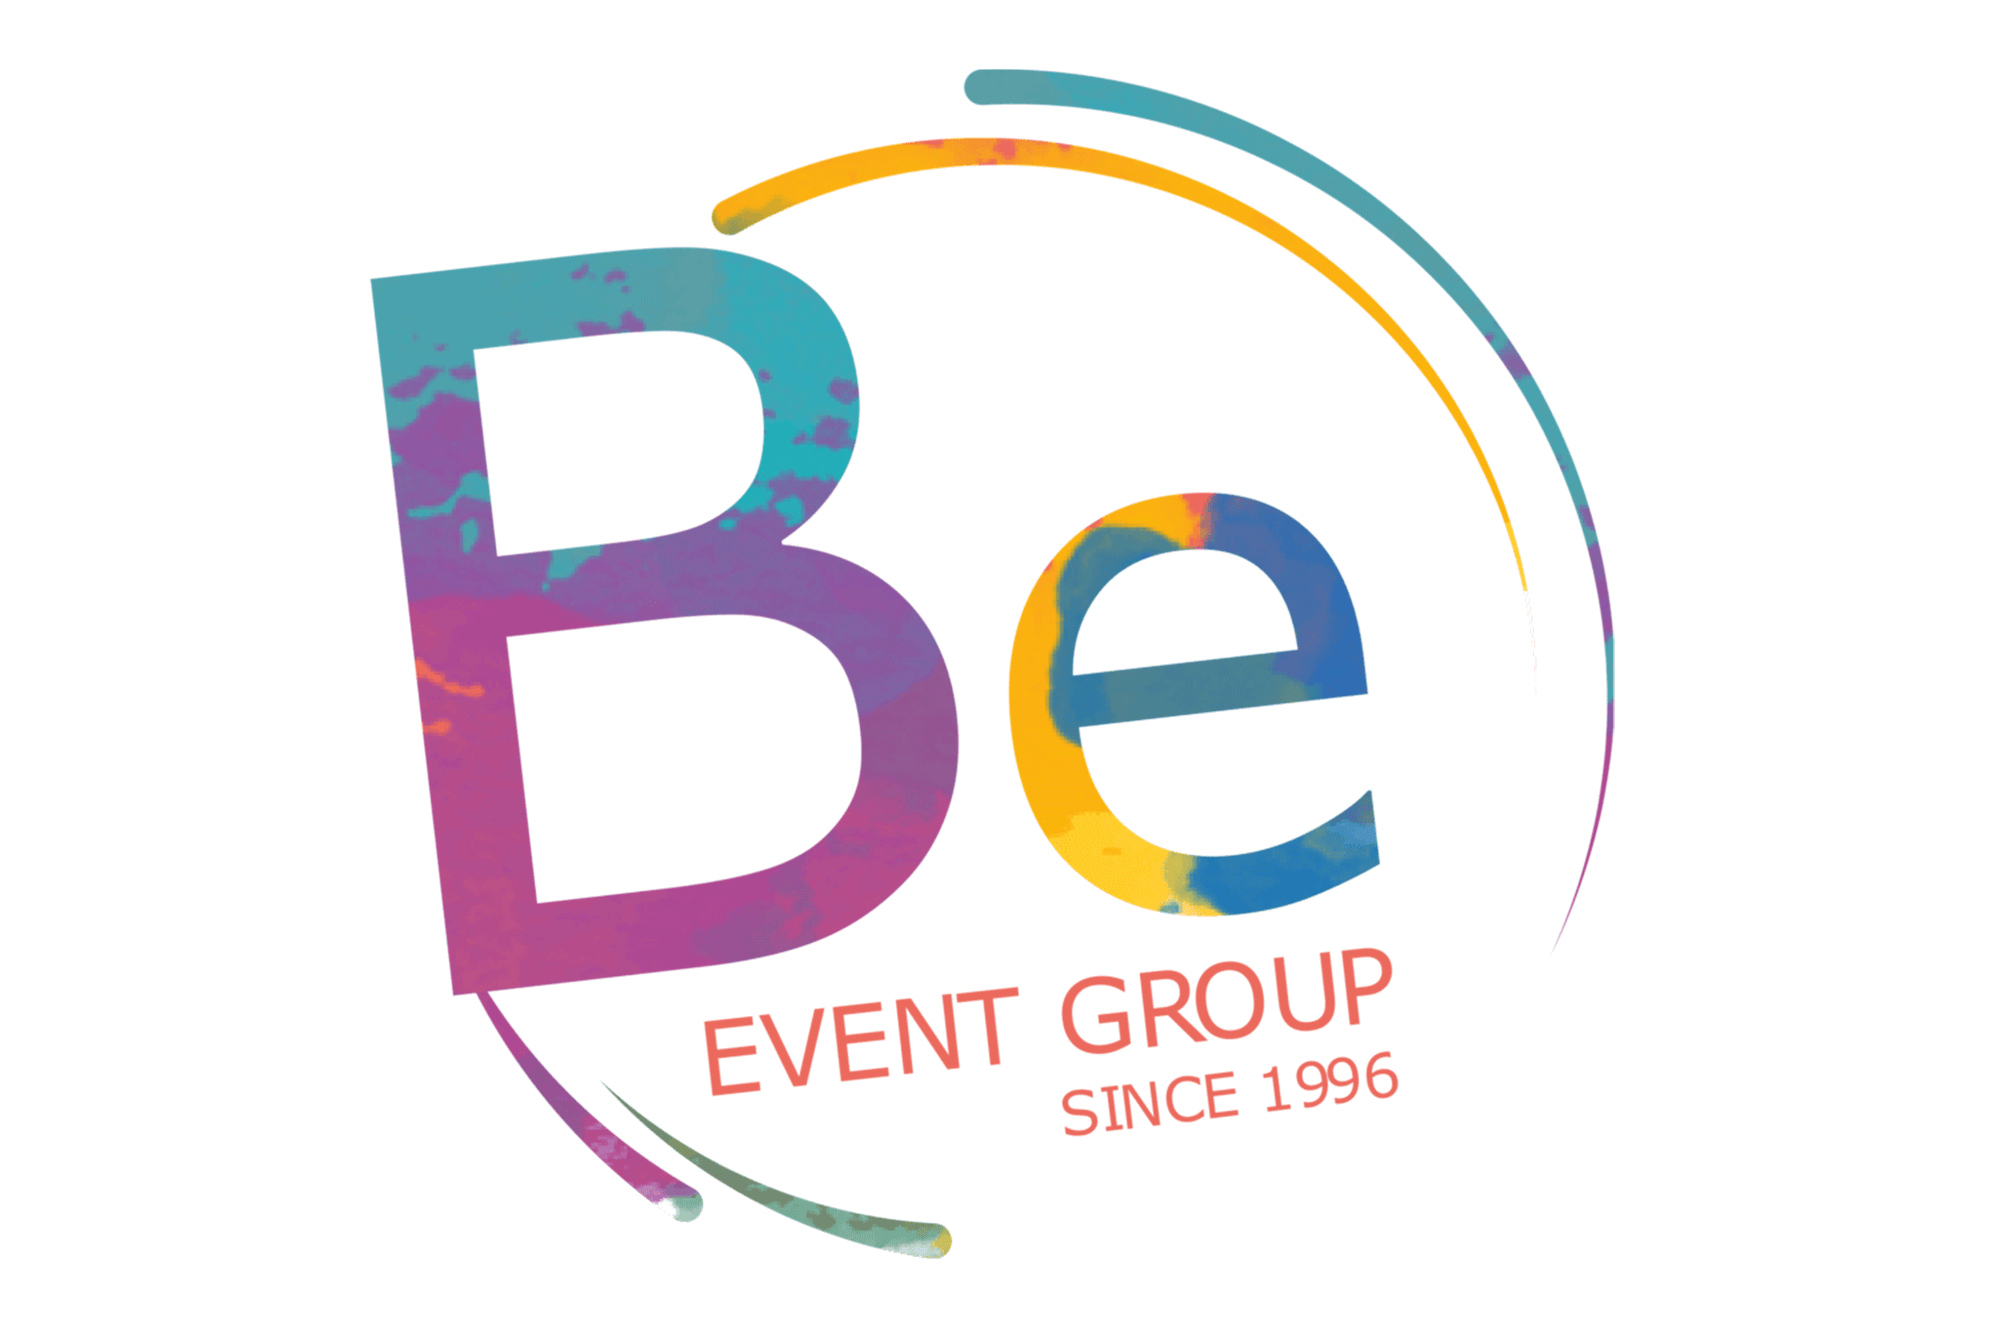 BE Event Group